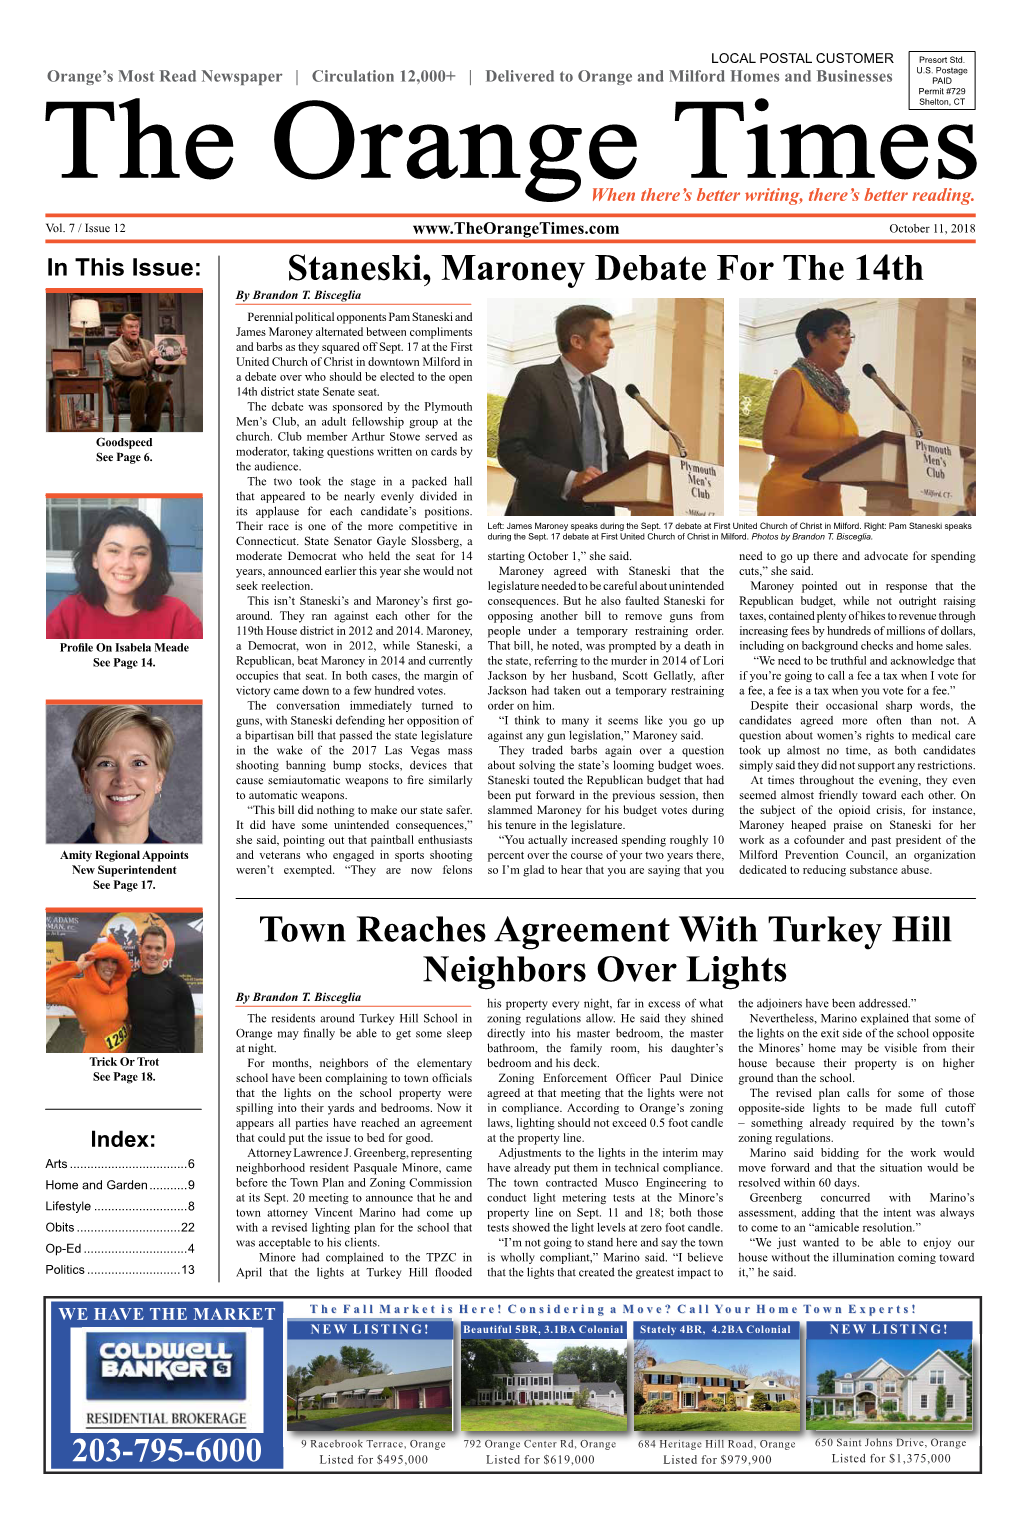 Read the Entire Oct. 11, 2018 Issue Here